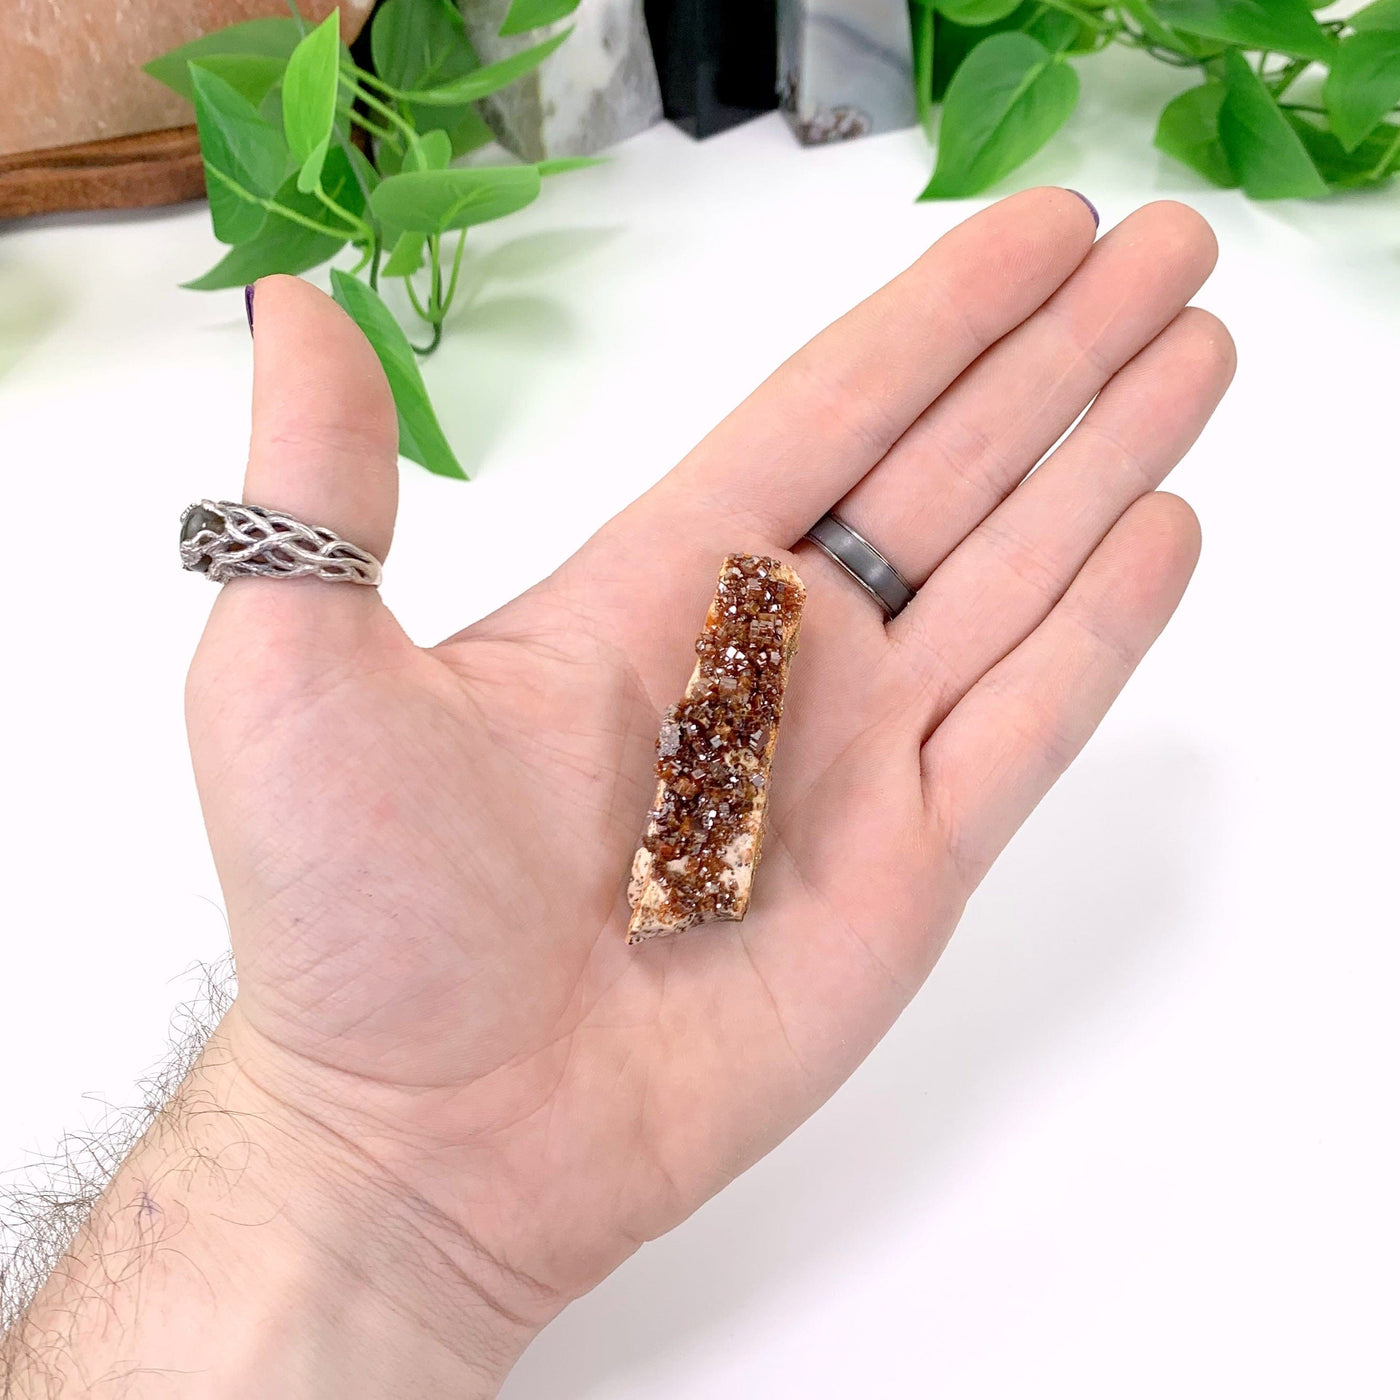 vanadinite cluster in hand with white background